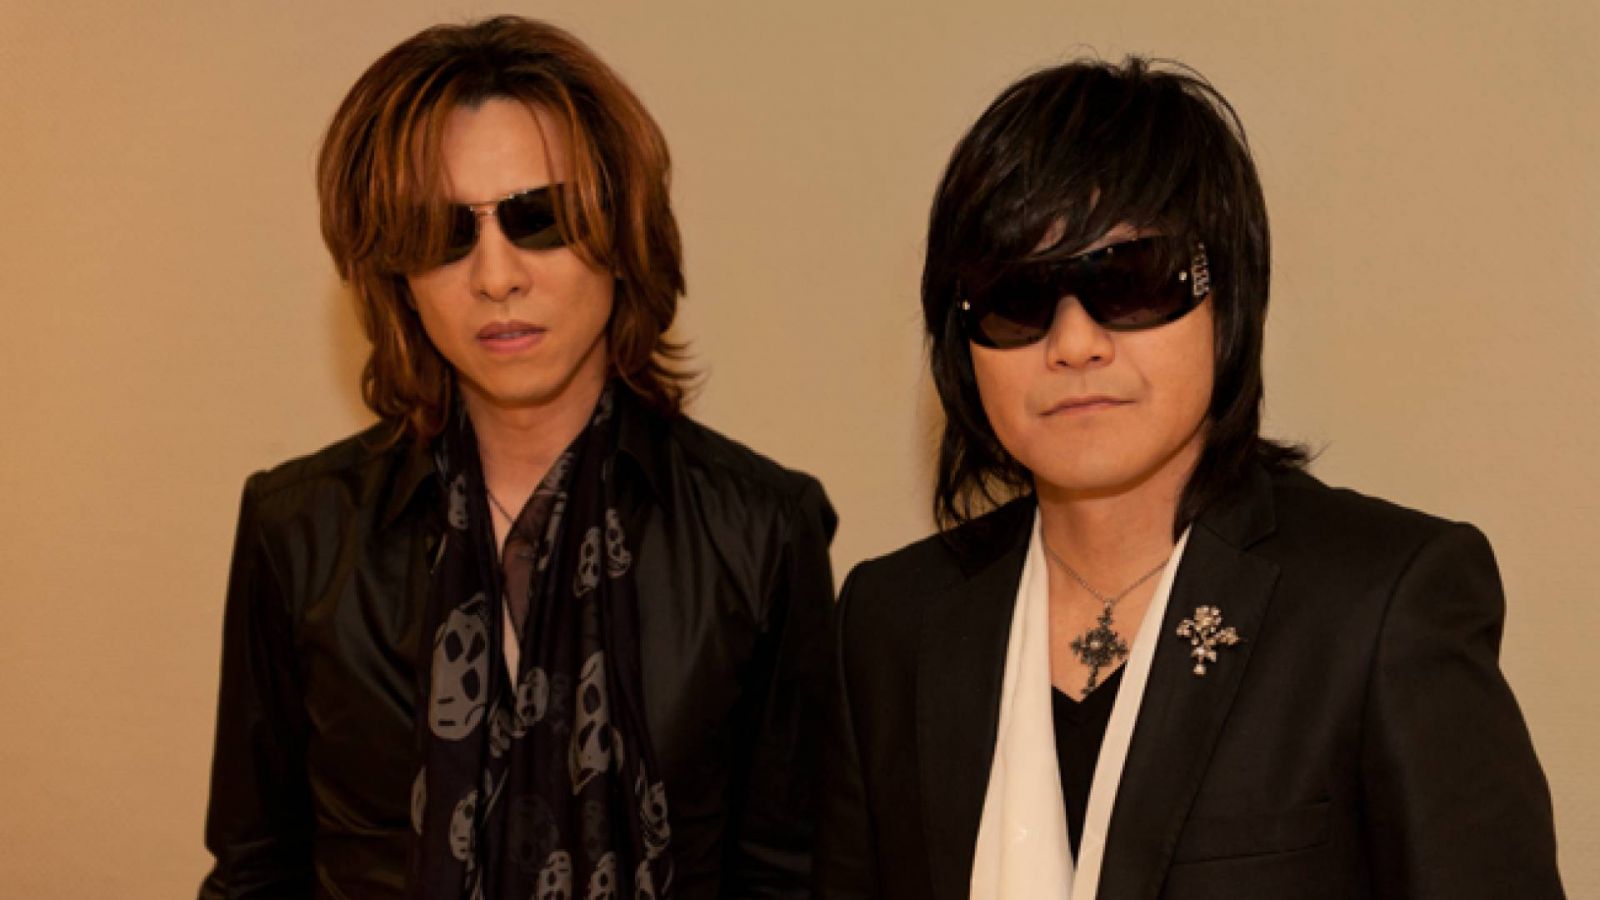 Press Conference with YOSHIKI and ToshI © X Japan - JaME - Didier CABOCHE